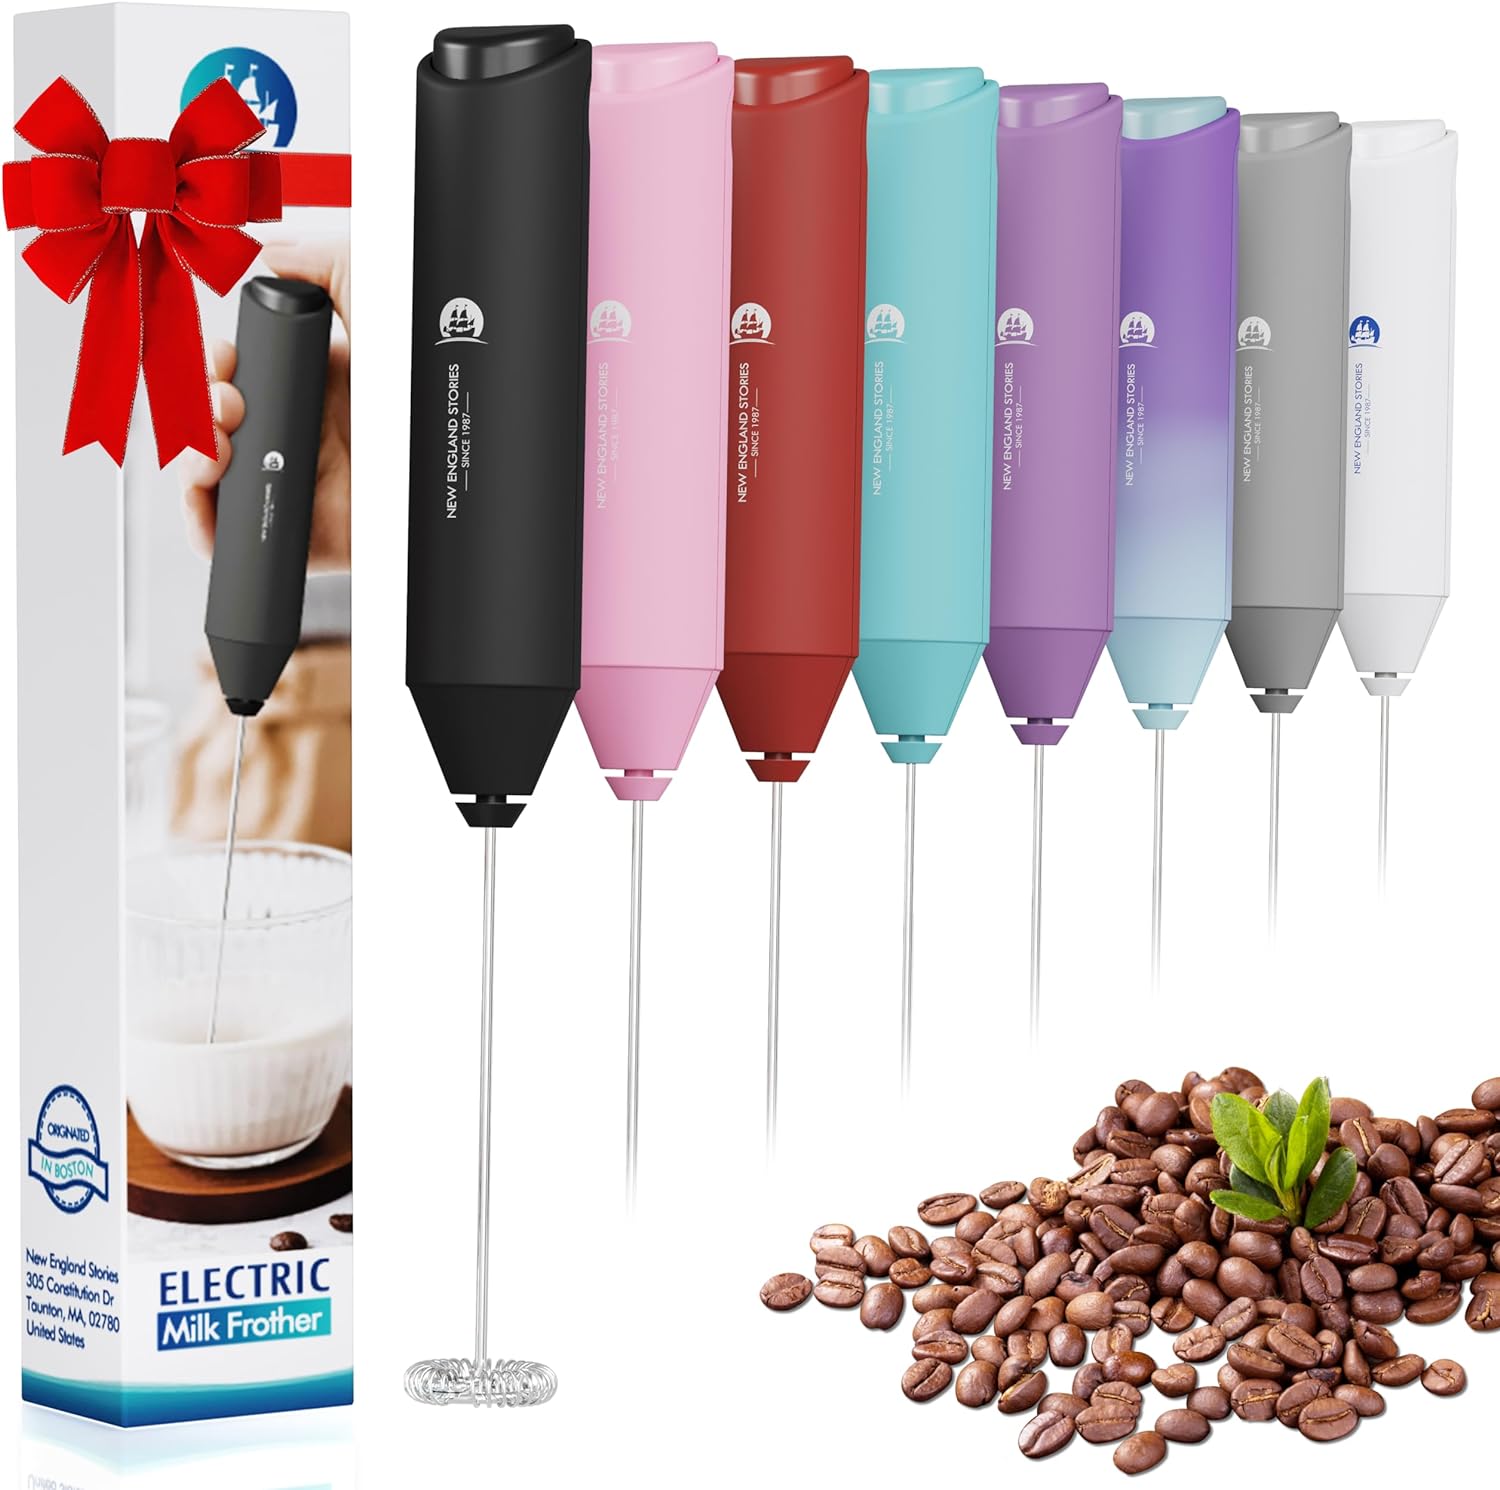 Powerful Milk Frother Handheld Foam Maker, Mini Whisk Drink Mixer for Coffee, Cappuccino, Latte, Matcha, Hot Chocolate, No Stand, Black